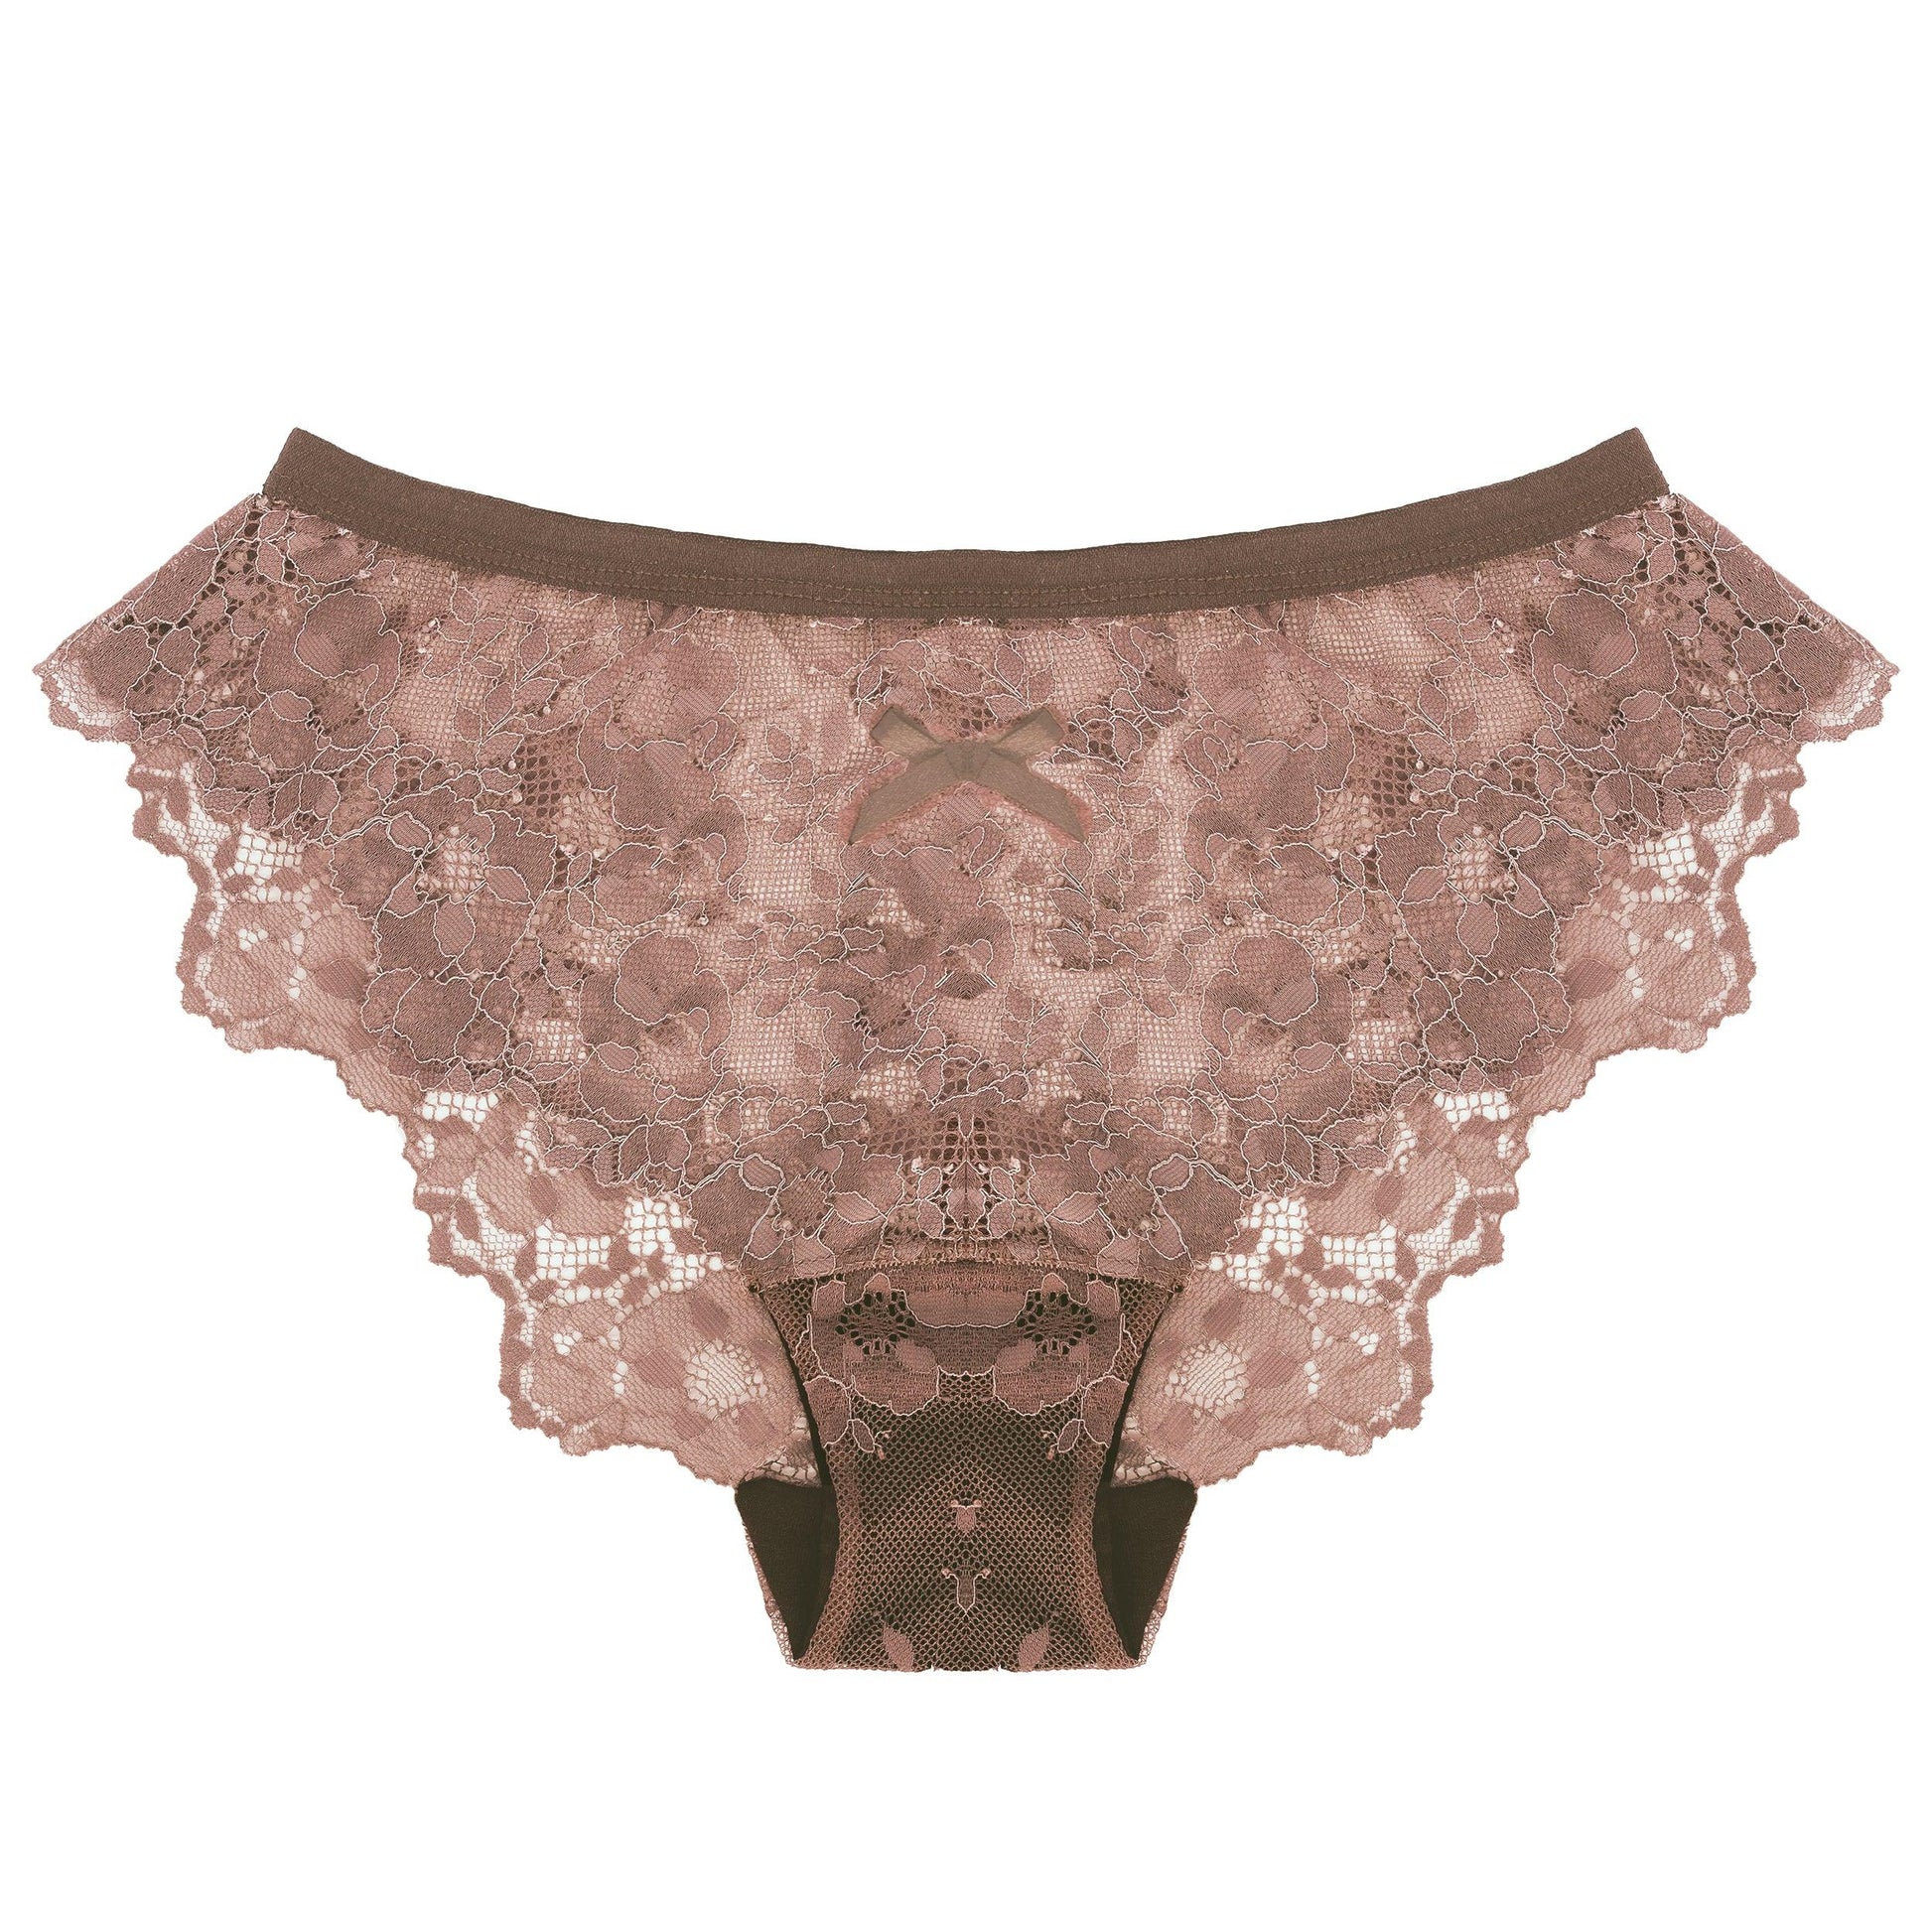 Lace Panty in Raw Cacao - Takkleberry